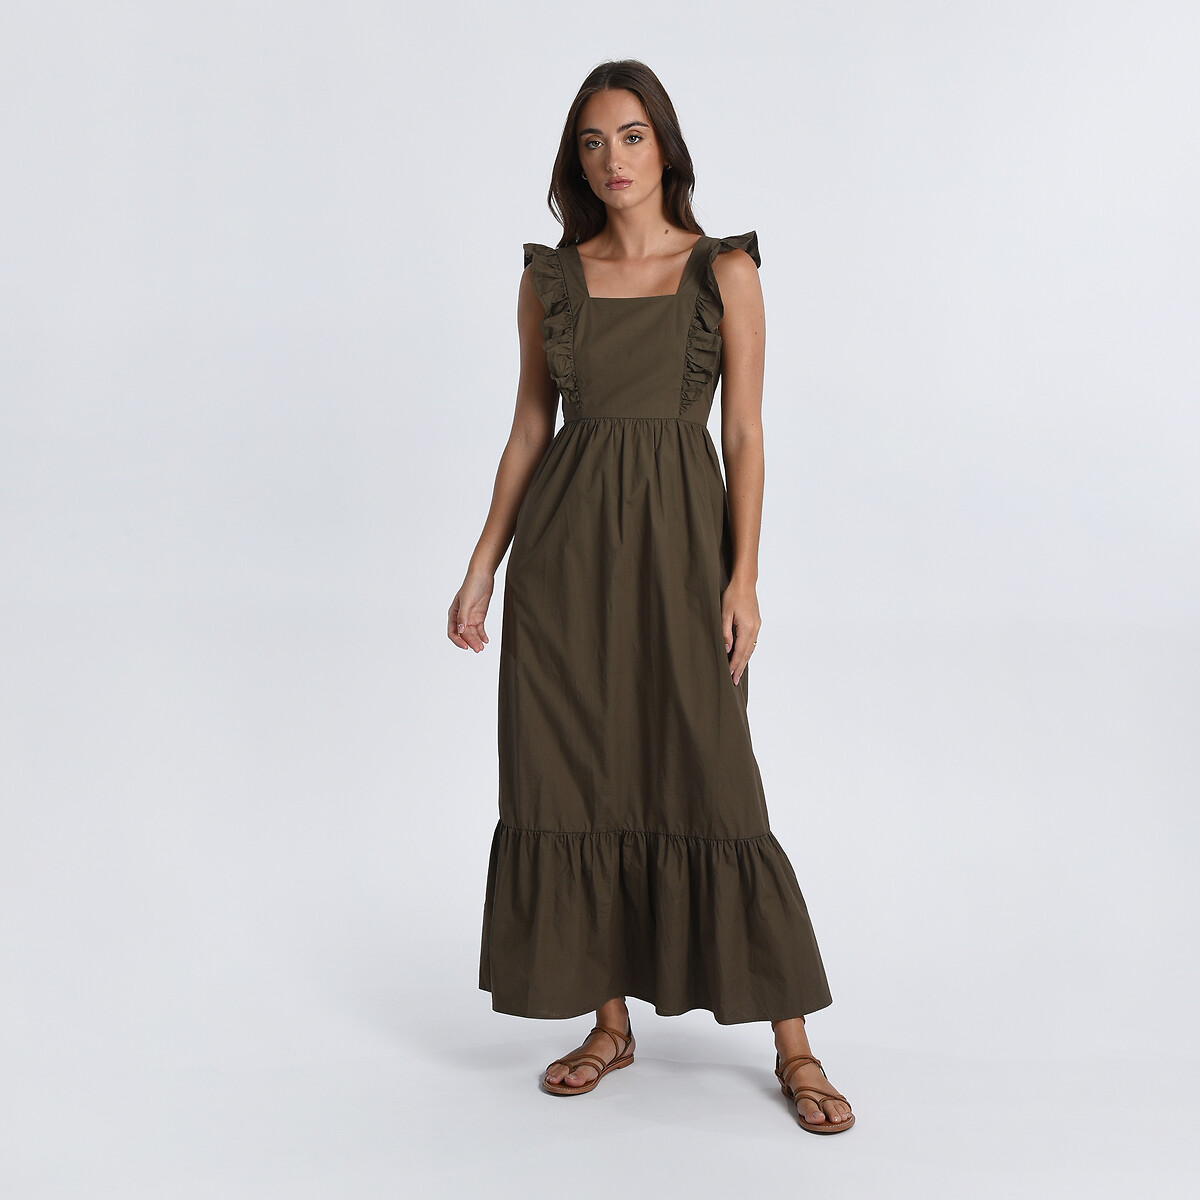 Cotton Ruffled Maxi Dress with Square Neck